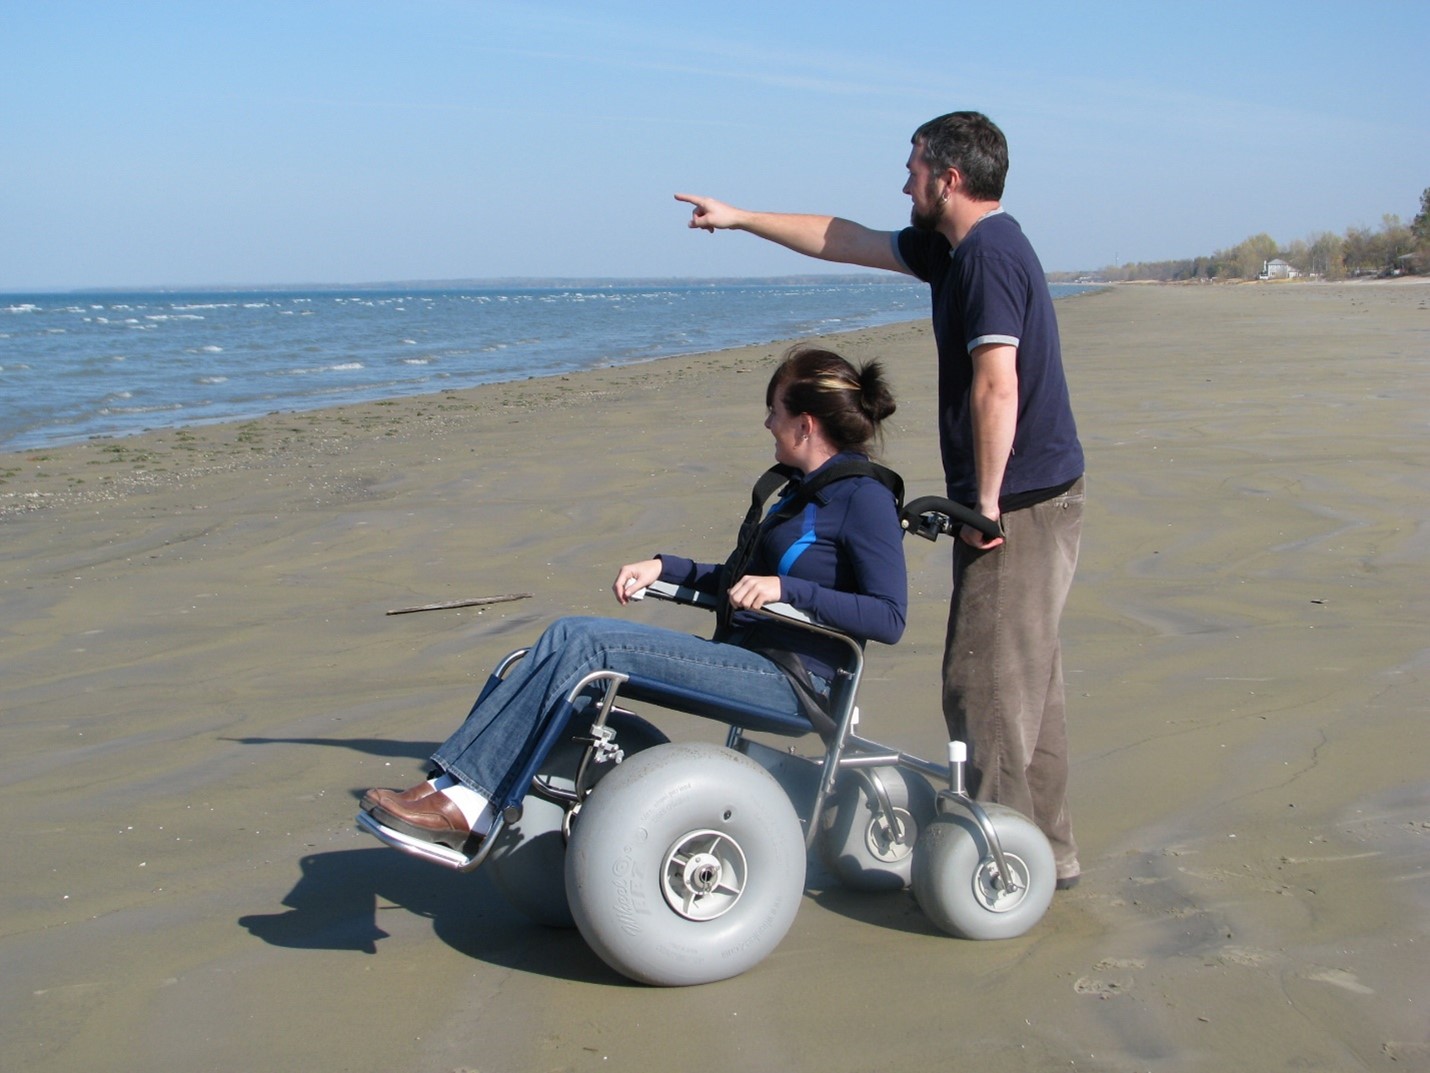 person pushing another on all-terrain wheelchair on beach